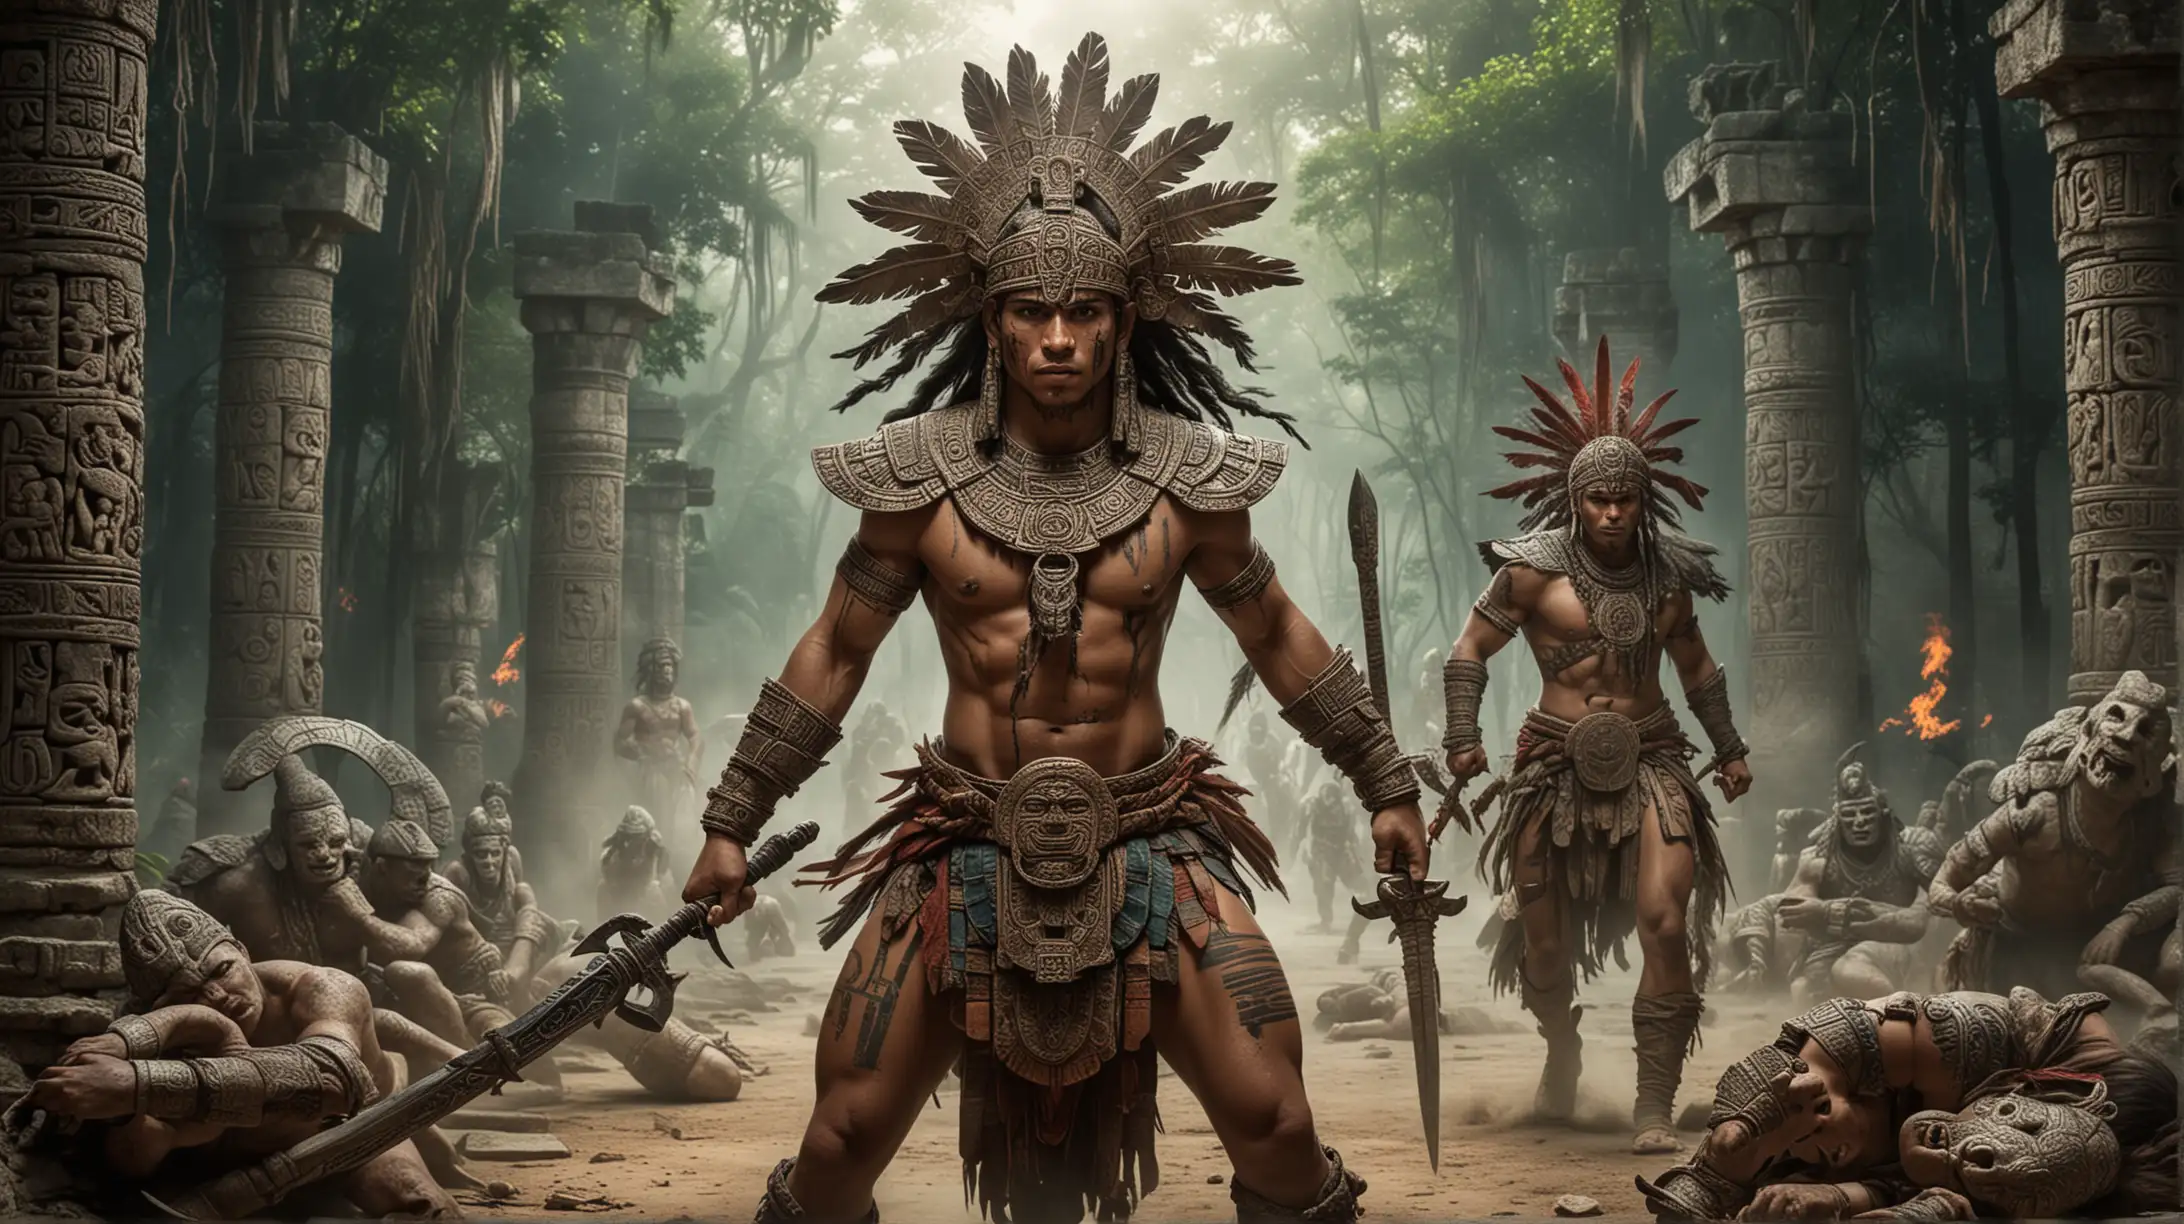 Two warrior twins from The Popul Vuh the Mayan myth battling the lords of the underworld and Mayan symbols behind them